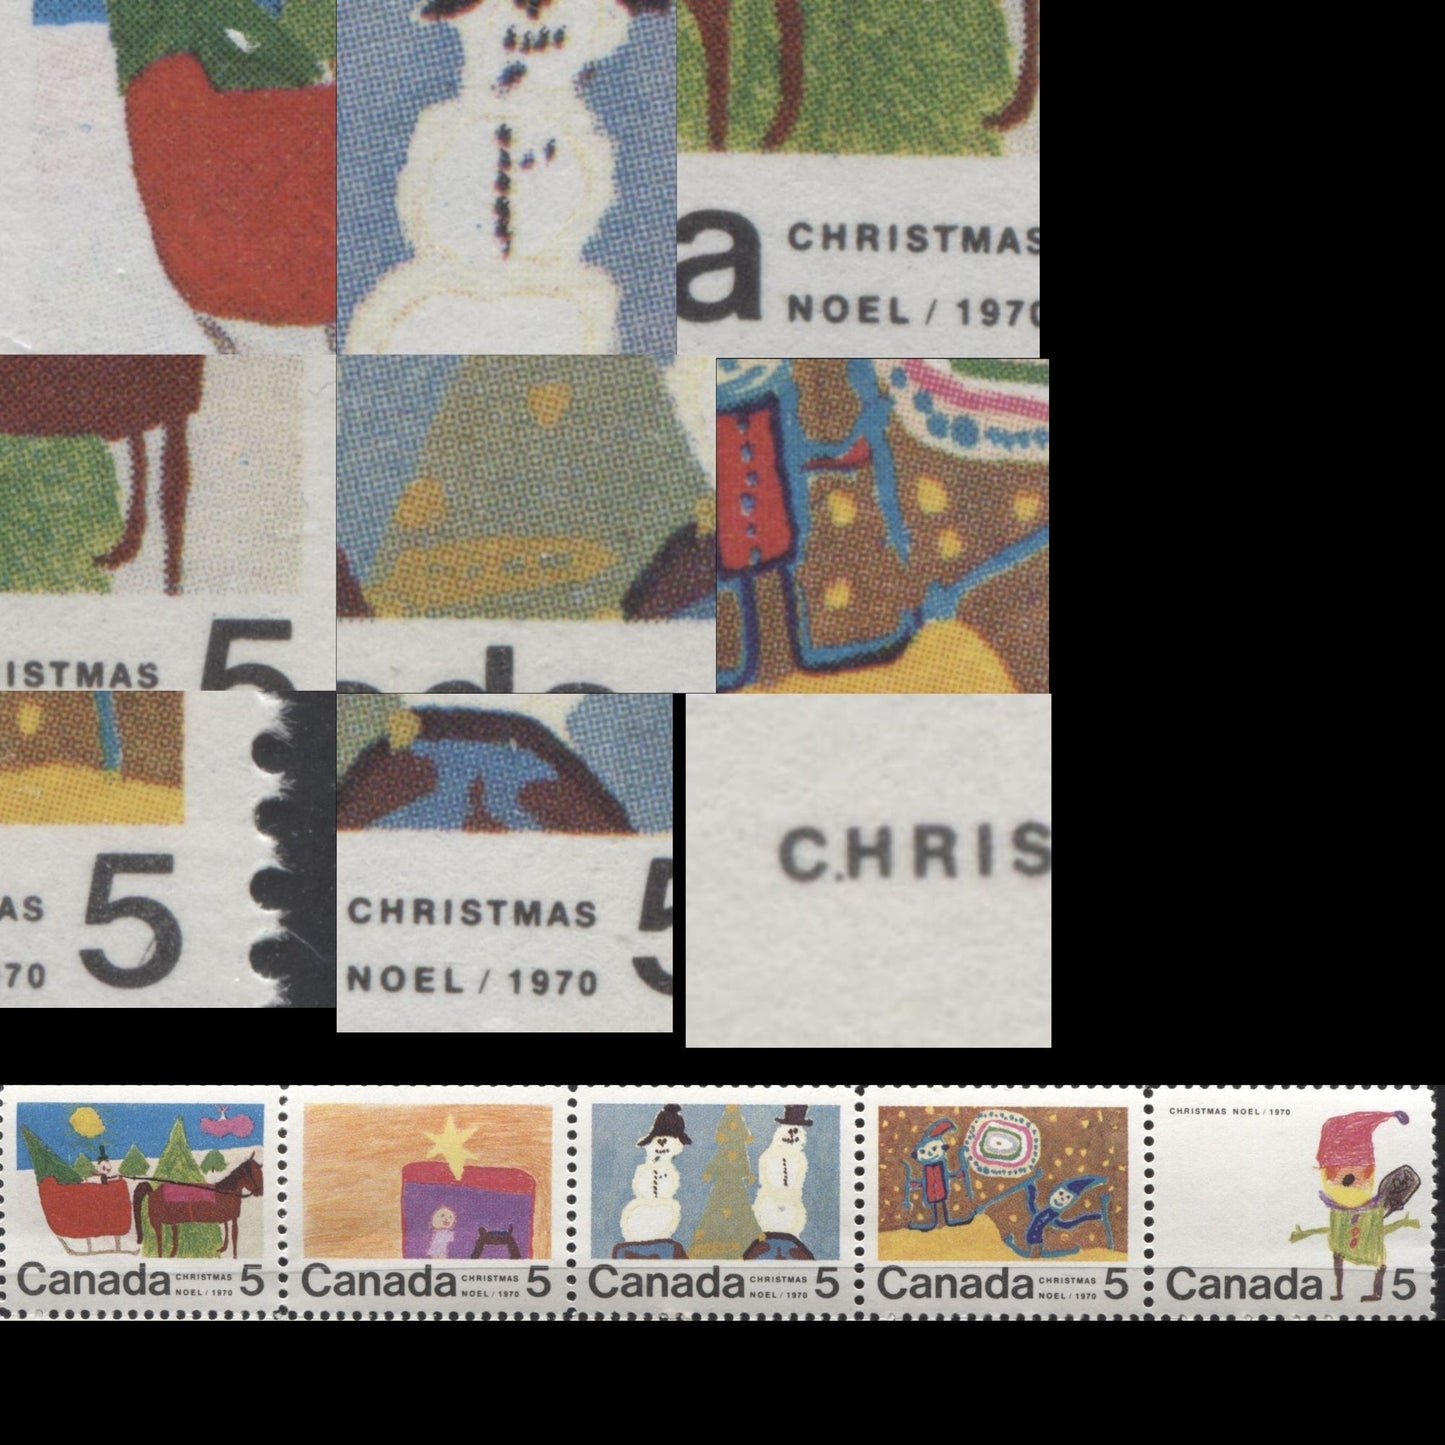 Lot 146 Canada #519p-523p 5c Multicoloured 1970 Christmas Issue, A Complete Set of 11 Winnipeg Tagged Constant Plate Varieties From Combination 4, Ribbed HB11 Paper, Perf. 11.95 x 11.9